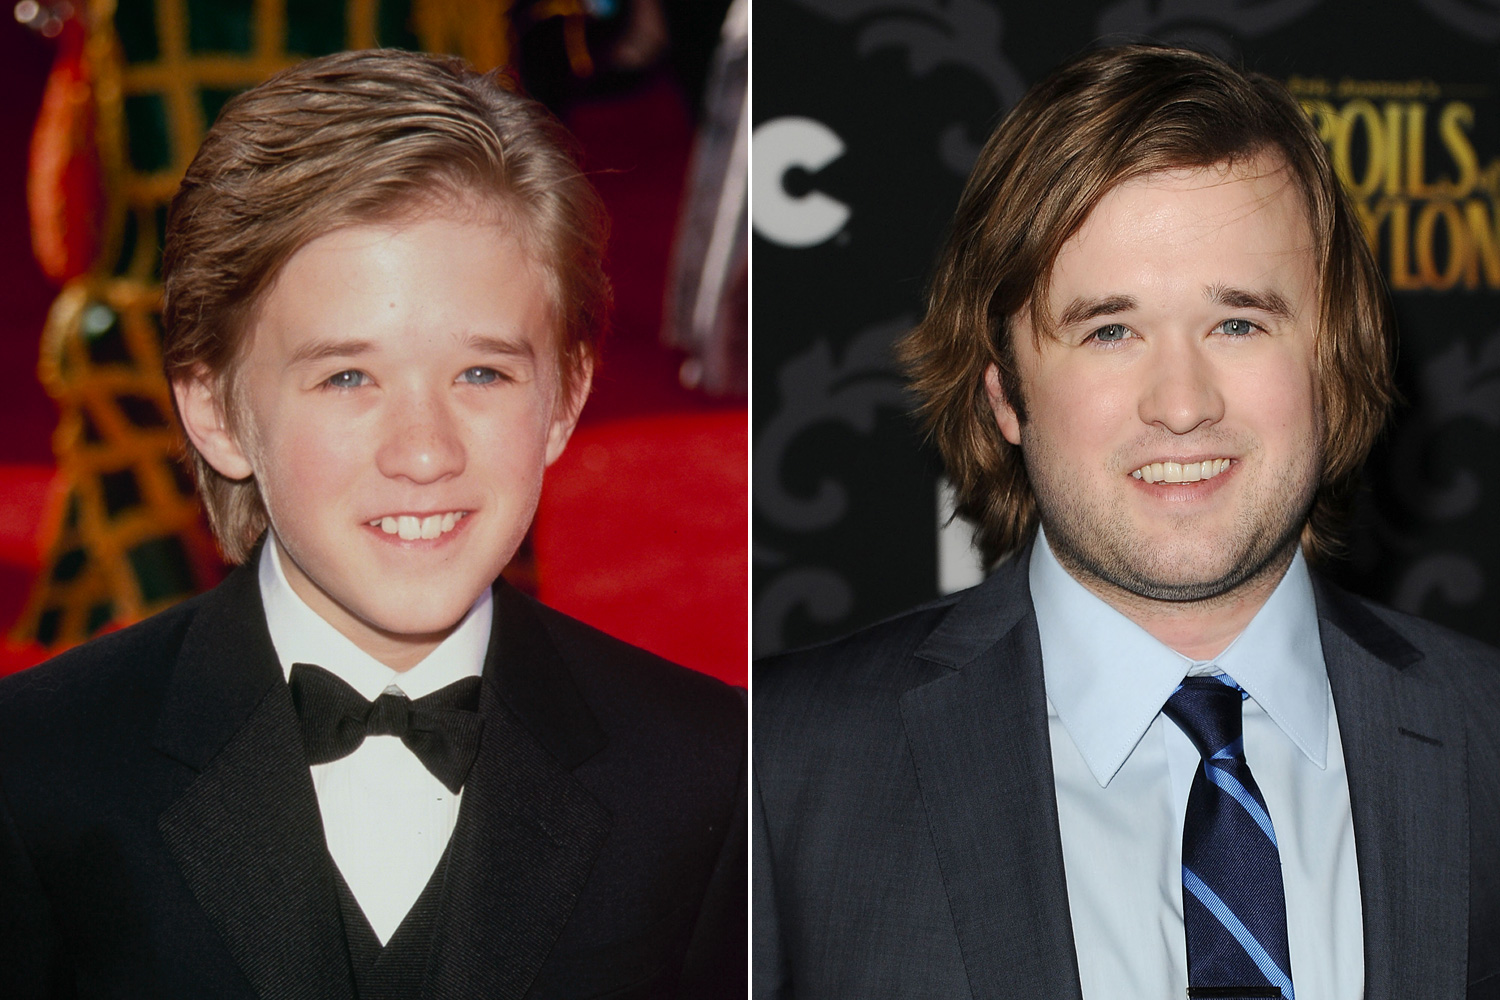 Haley Joel Osment made his big-screen debut in  Forrest Gump  as Hanks' son. His best-known role came five years later in  The Sixth Sense,  but recently has focused more on television projects, including  Alpha House  and  The Spoils of Babylon.